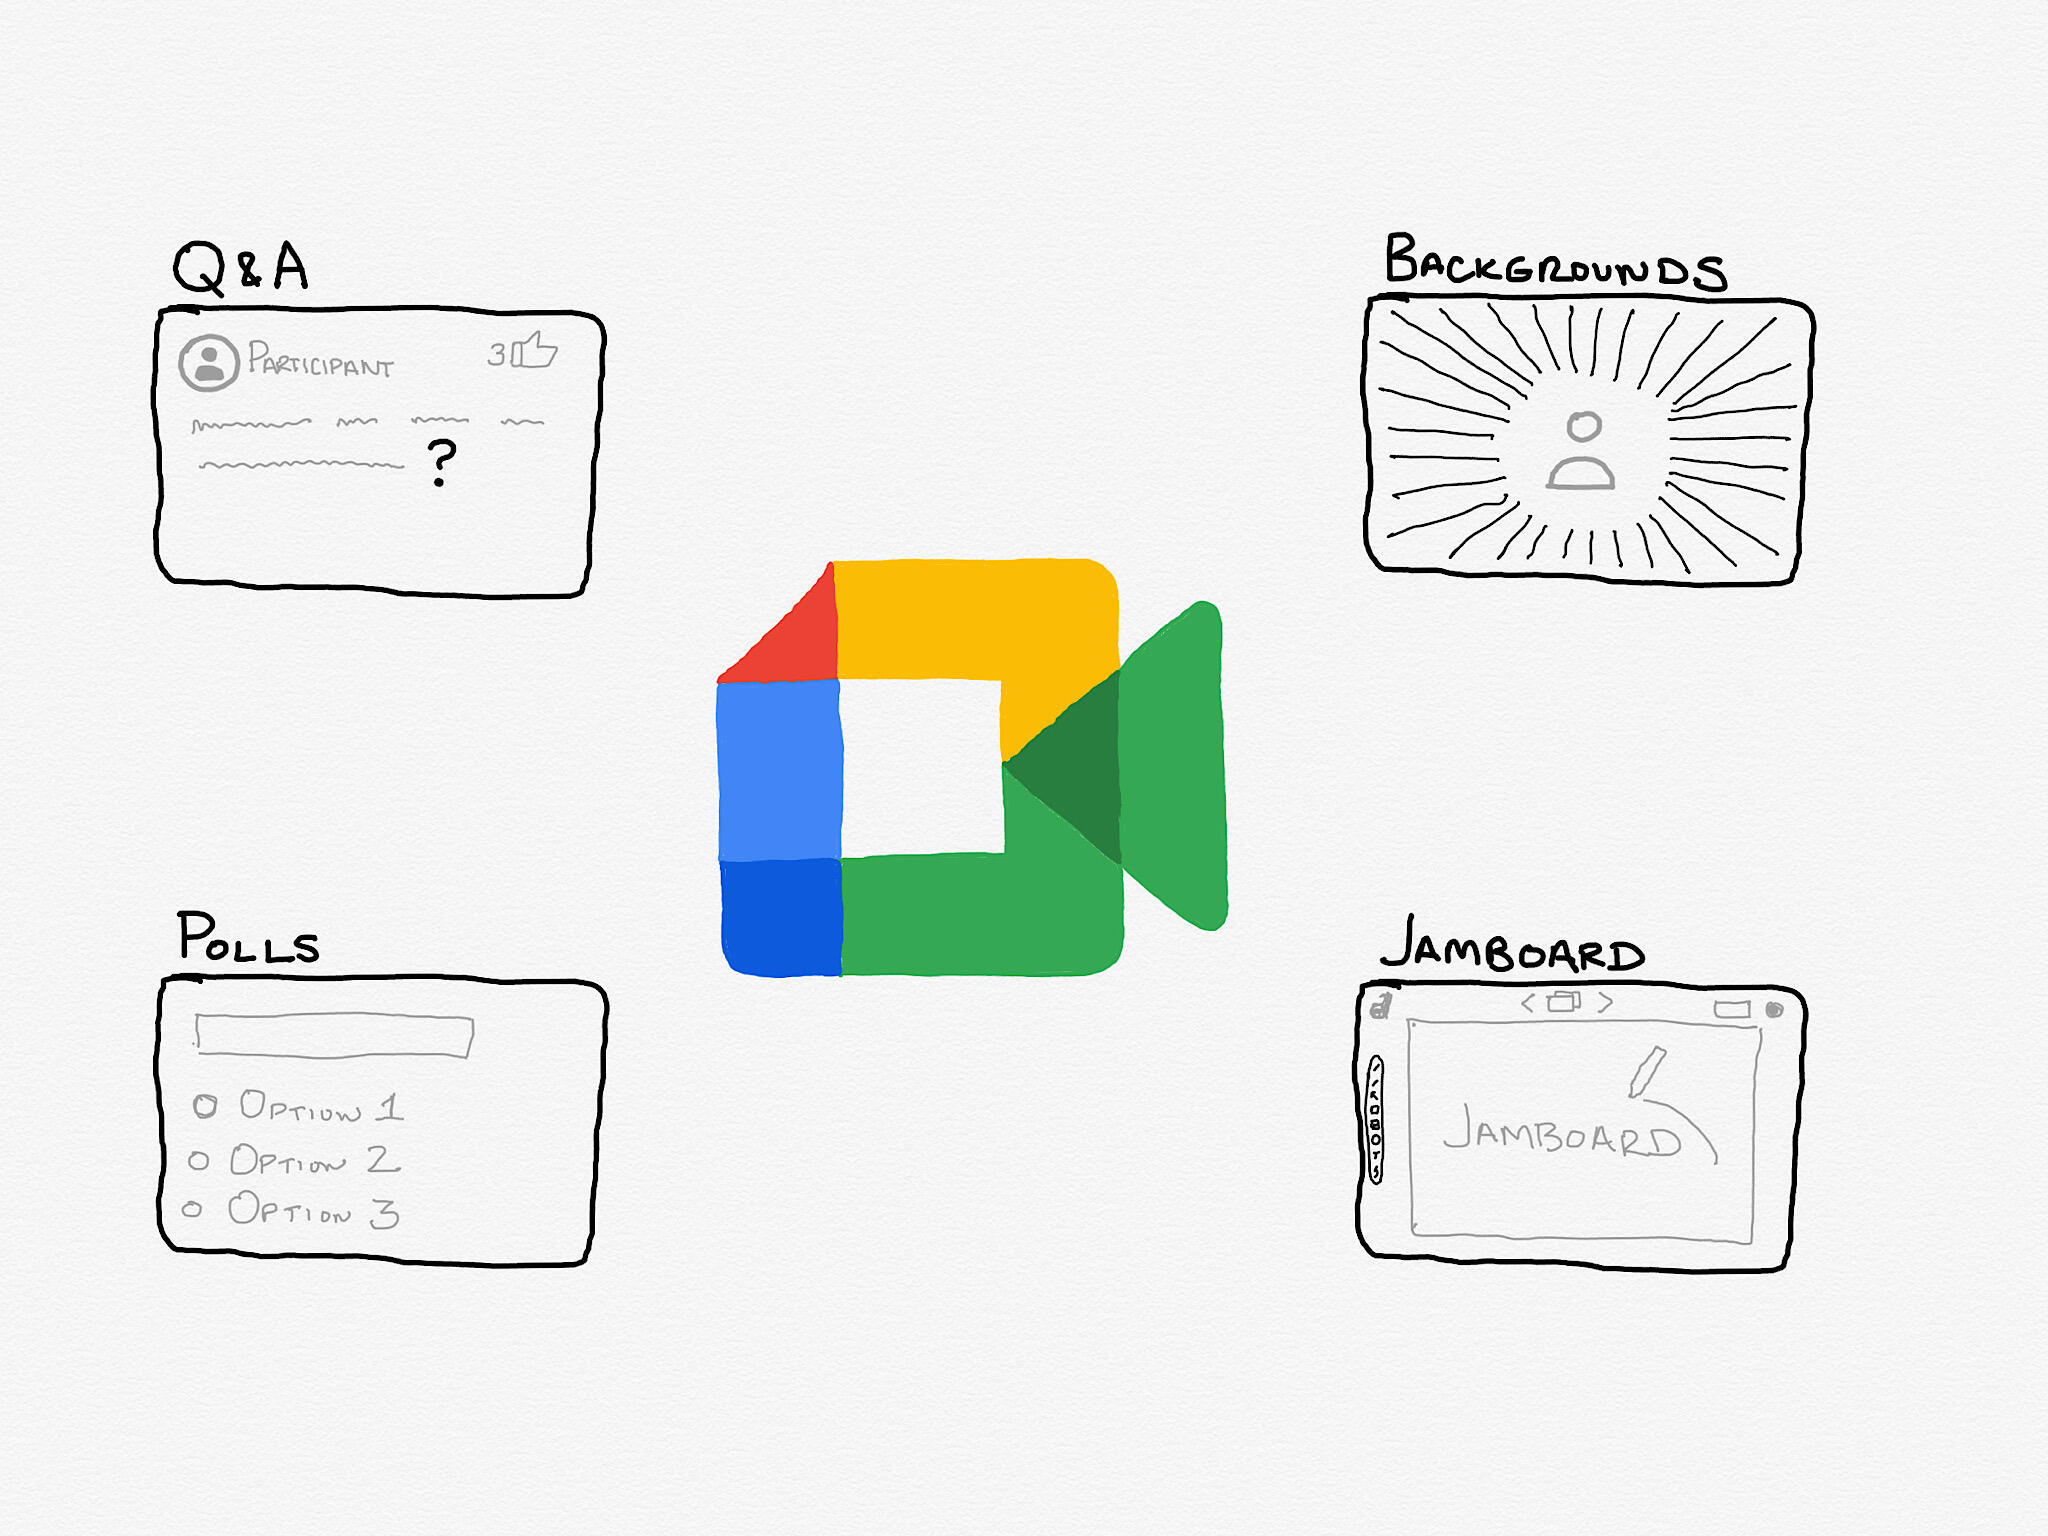 Hand drawing of Google Meet icon (center), surrounded by 4 rectangles: Backgrounds, Jamboard, Q&A, and Polls.